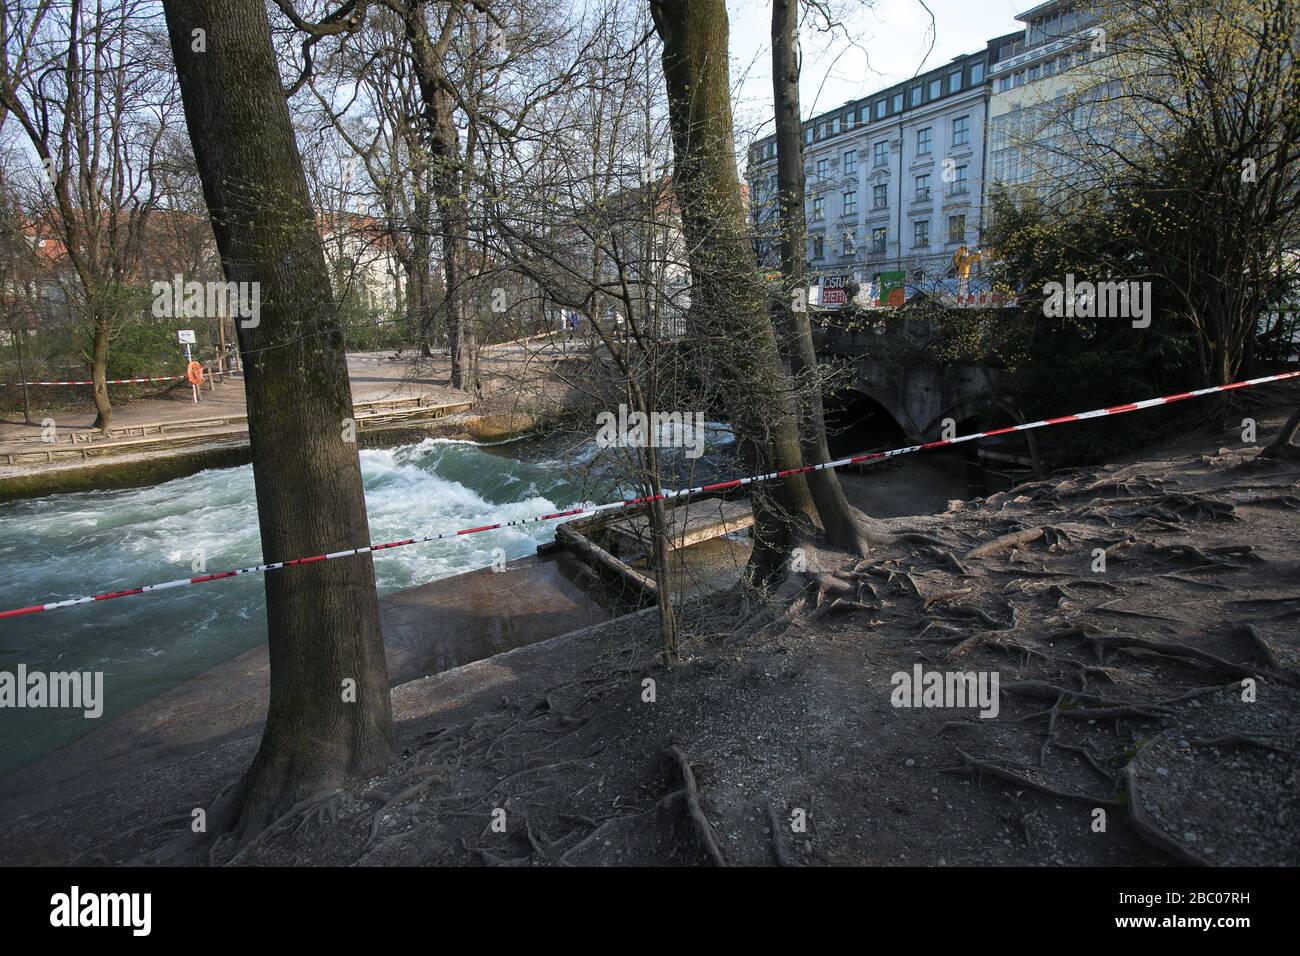 The Eisbach wave on Prinzregentenstrasse in the English Garden is closed due to the rampant corona virus. [automated translation] Stock Photo